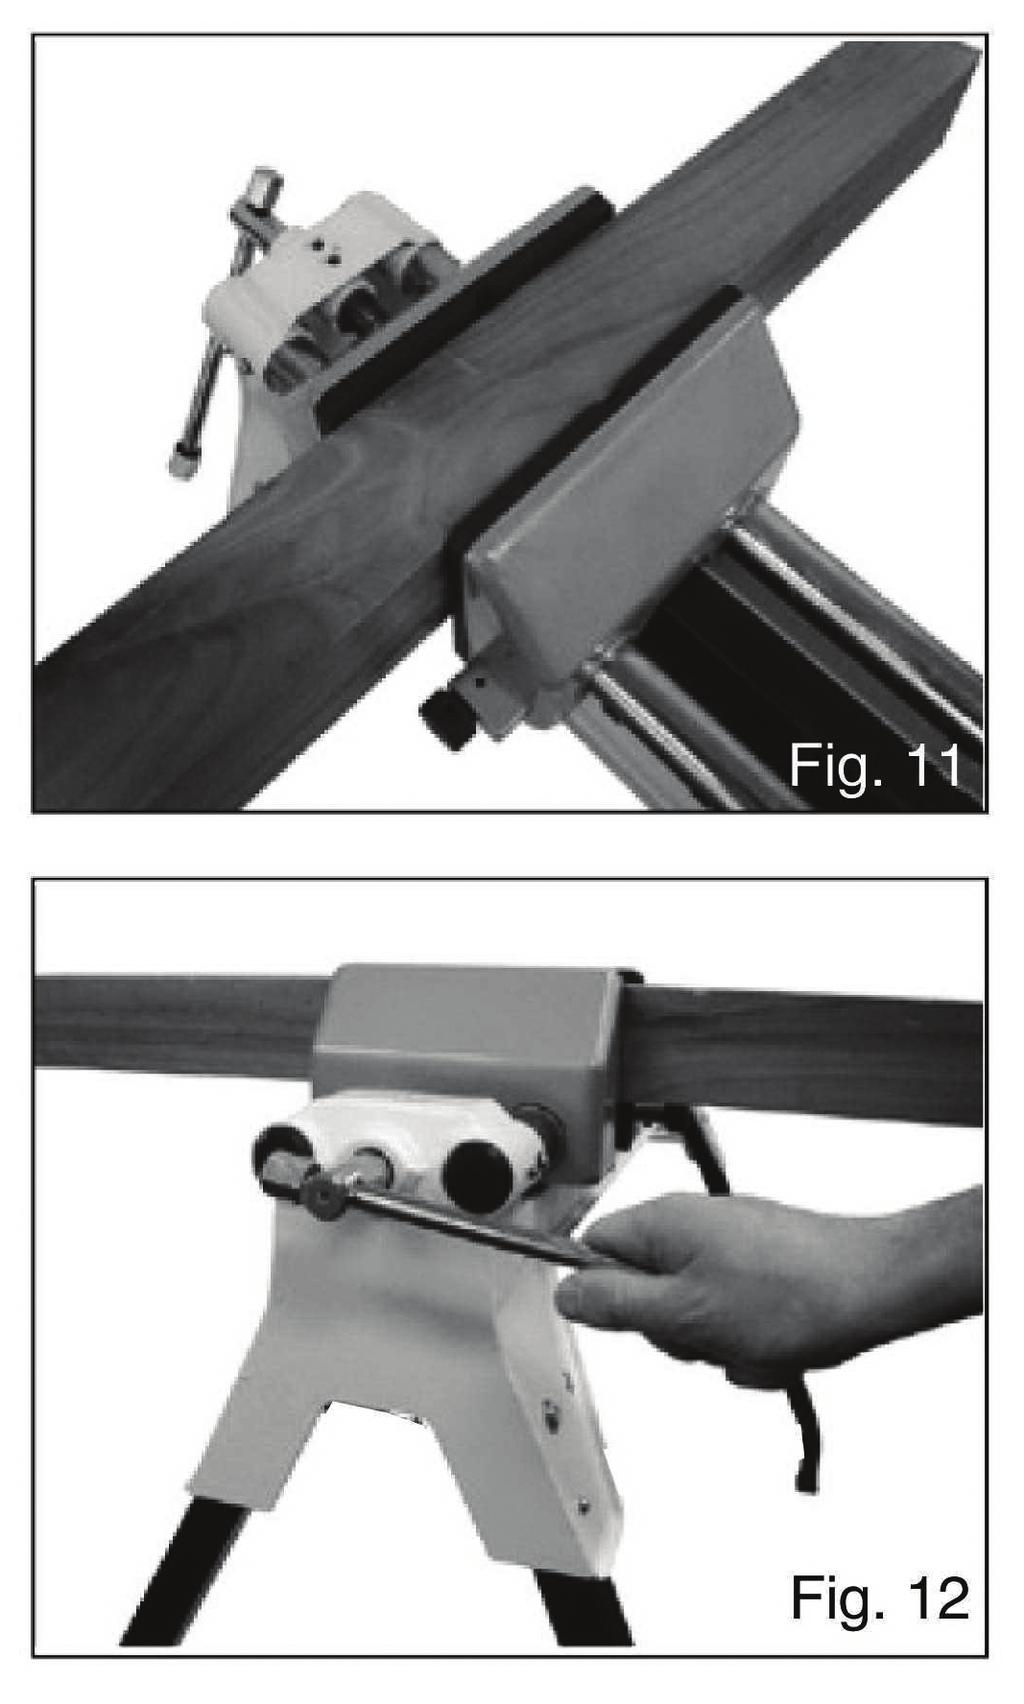 Clamping material 1. Ensure the front vise jaw is located towards the front of the Uni-Jaws. 2. Place the workpiece onto the vise rails in between the front vise and rear vise jaws. (Fig.11) 3.